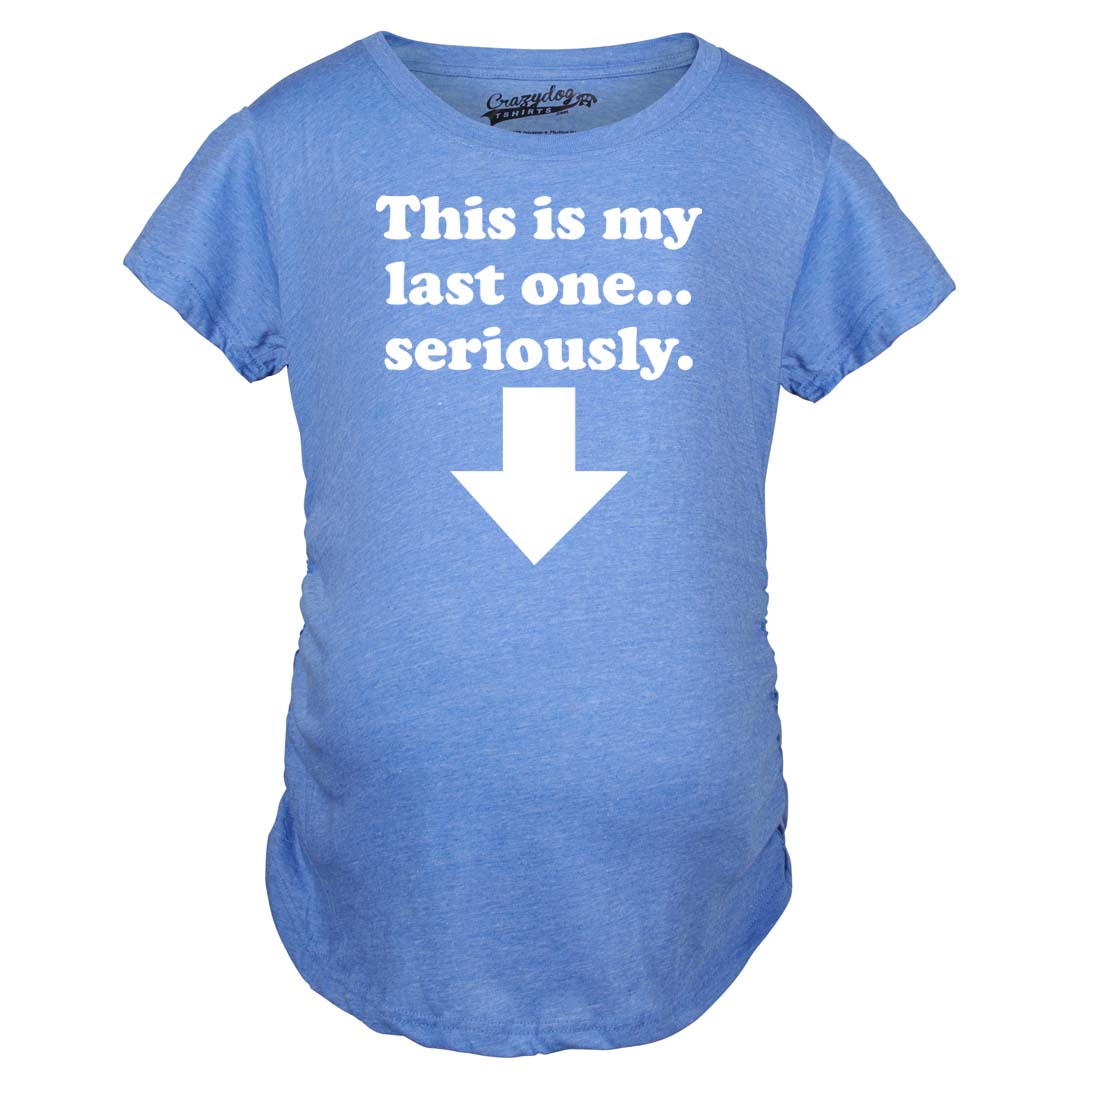 Funny Heather Light Blue - Last One This Is My Last One Seriously Maternity T Shirt Nerdy Sarcastic Tee